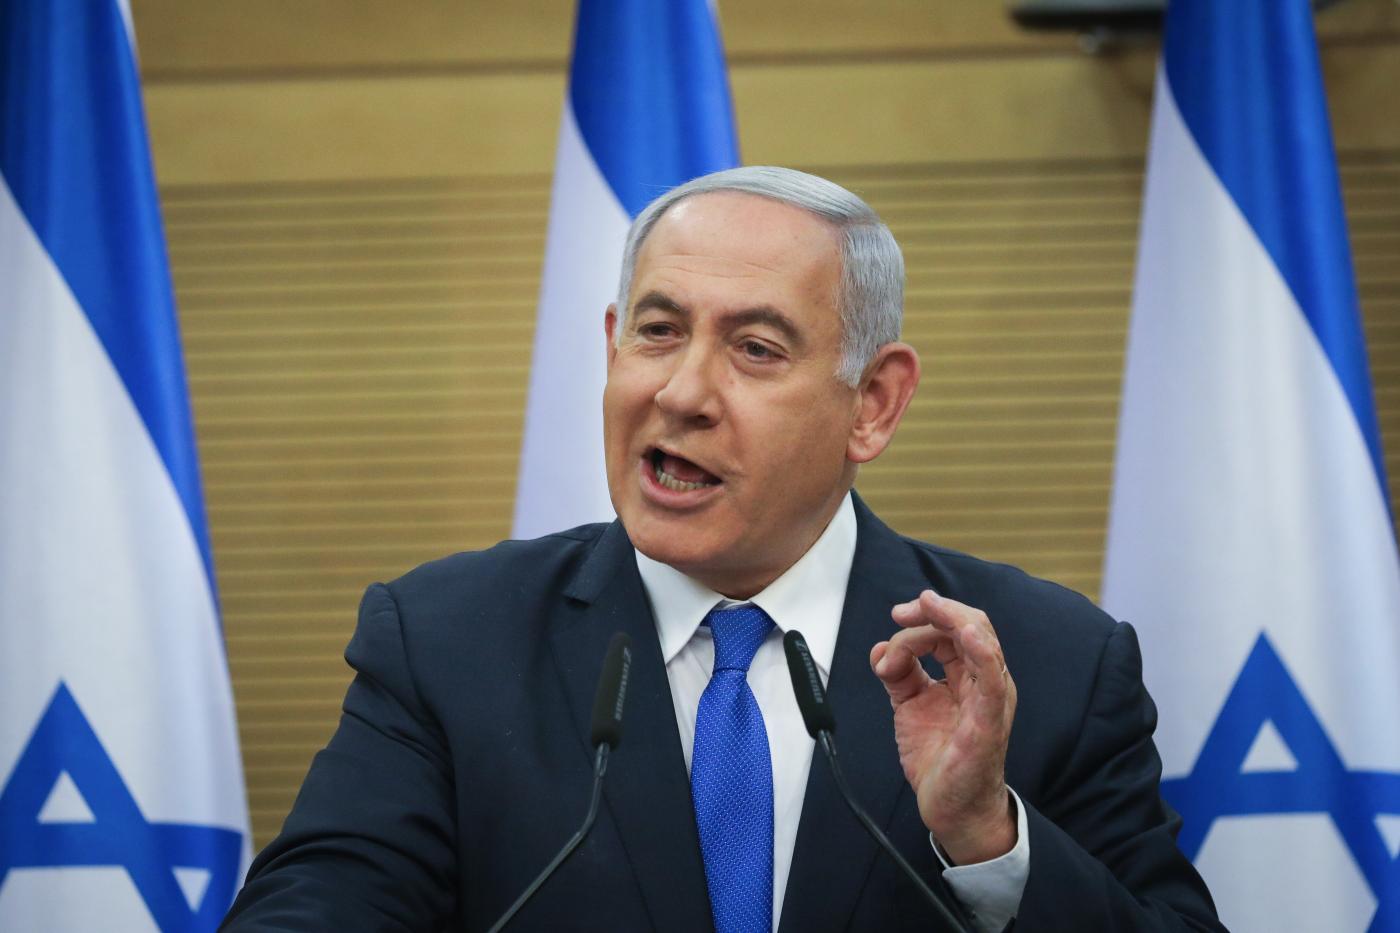 JERUSALEM, May 27, 2019 (Xinhua) -- Israeli Prime Minister Benjamin Netanyahu delivers a statement in Israeli parliament in Jerusalem, on May 27, 2019. Israeli Prime Minister Benjamin Netanyahu announced on Monday that he is making tremendous efforts to form a new government in the last 48 hours before the deadline. However, he admitted that he had not yet persuaded Avigdor Lieberman, head of Yisrael Beiteinu party, to join the coalition. (Xinhua/JINI/IANS) by JINI.